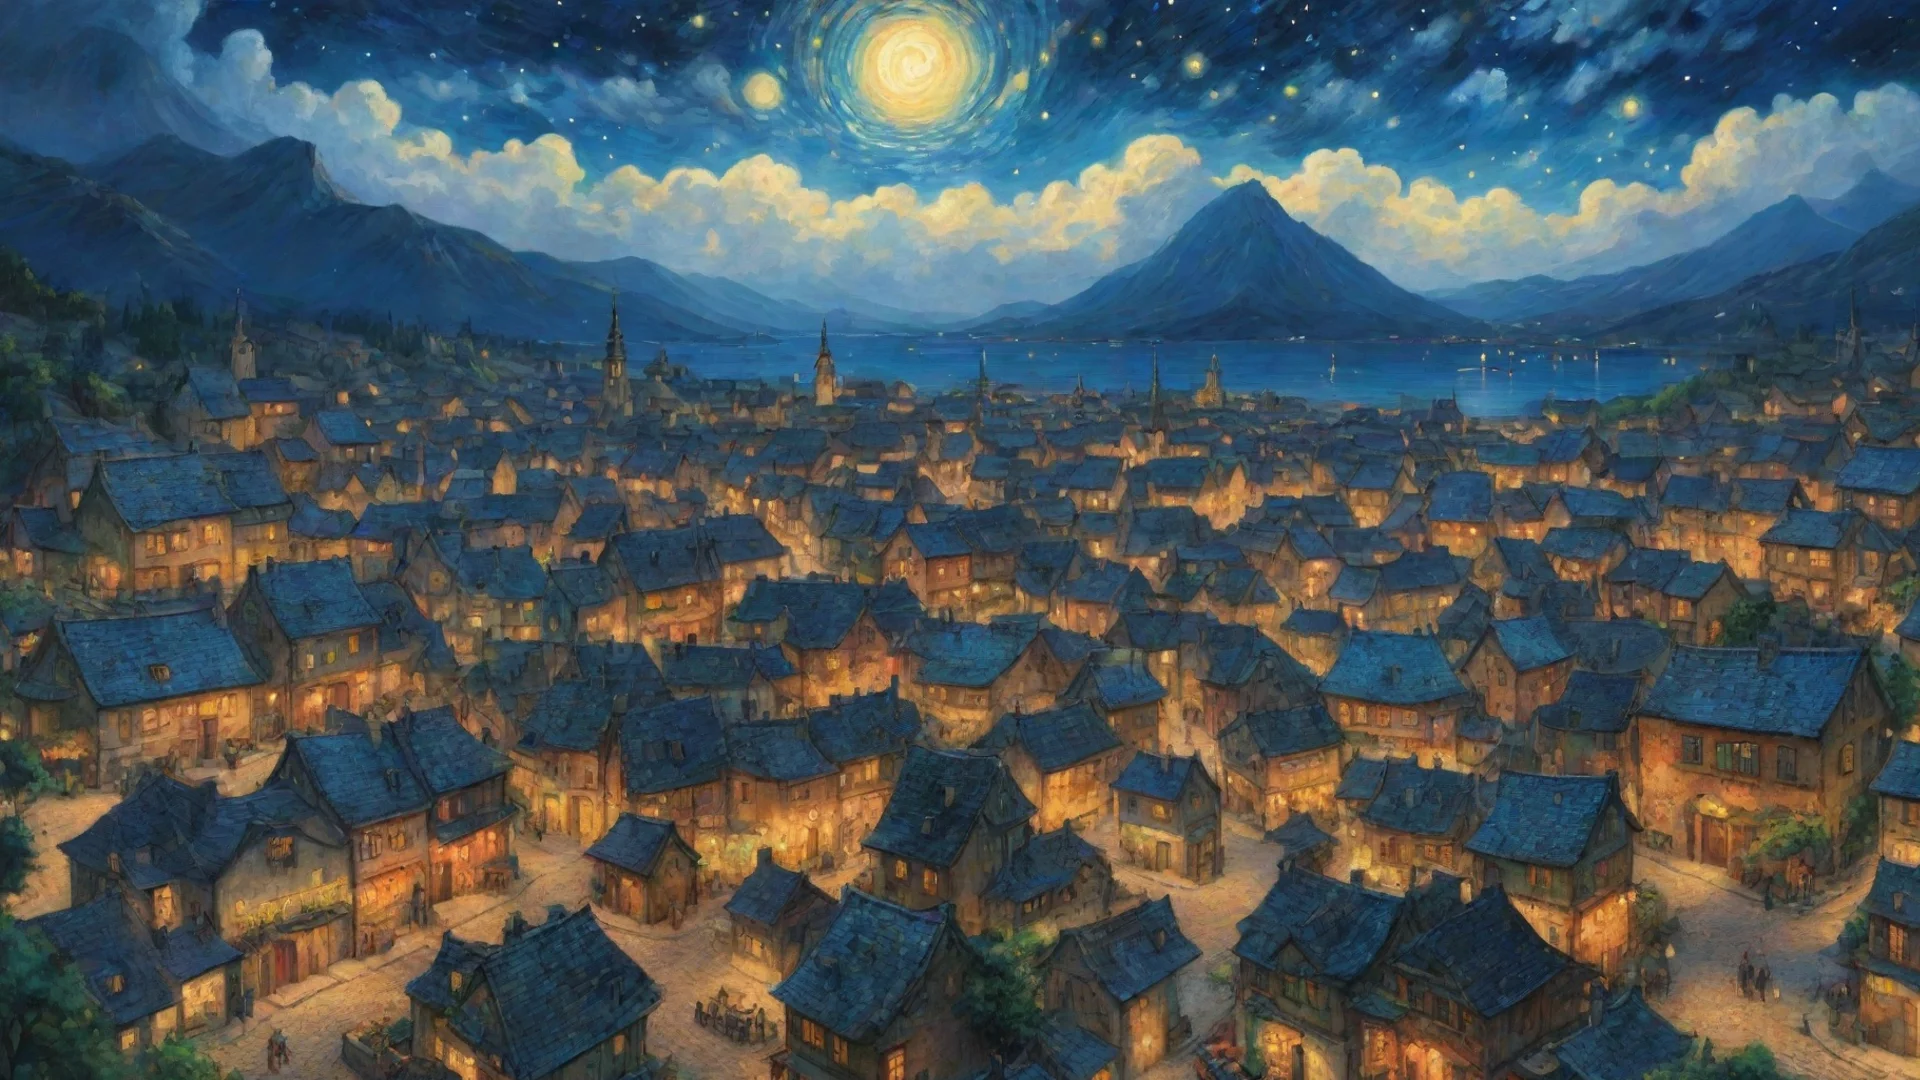 aitrending heavenly epic town lit up at night sky epic lovely artistic ghibli van gogh happyness bliss peace  detailed asthetic hd wow good looking fantastic 1 wide